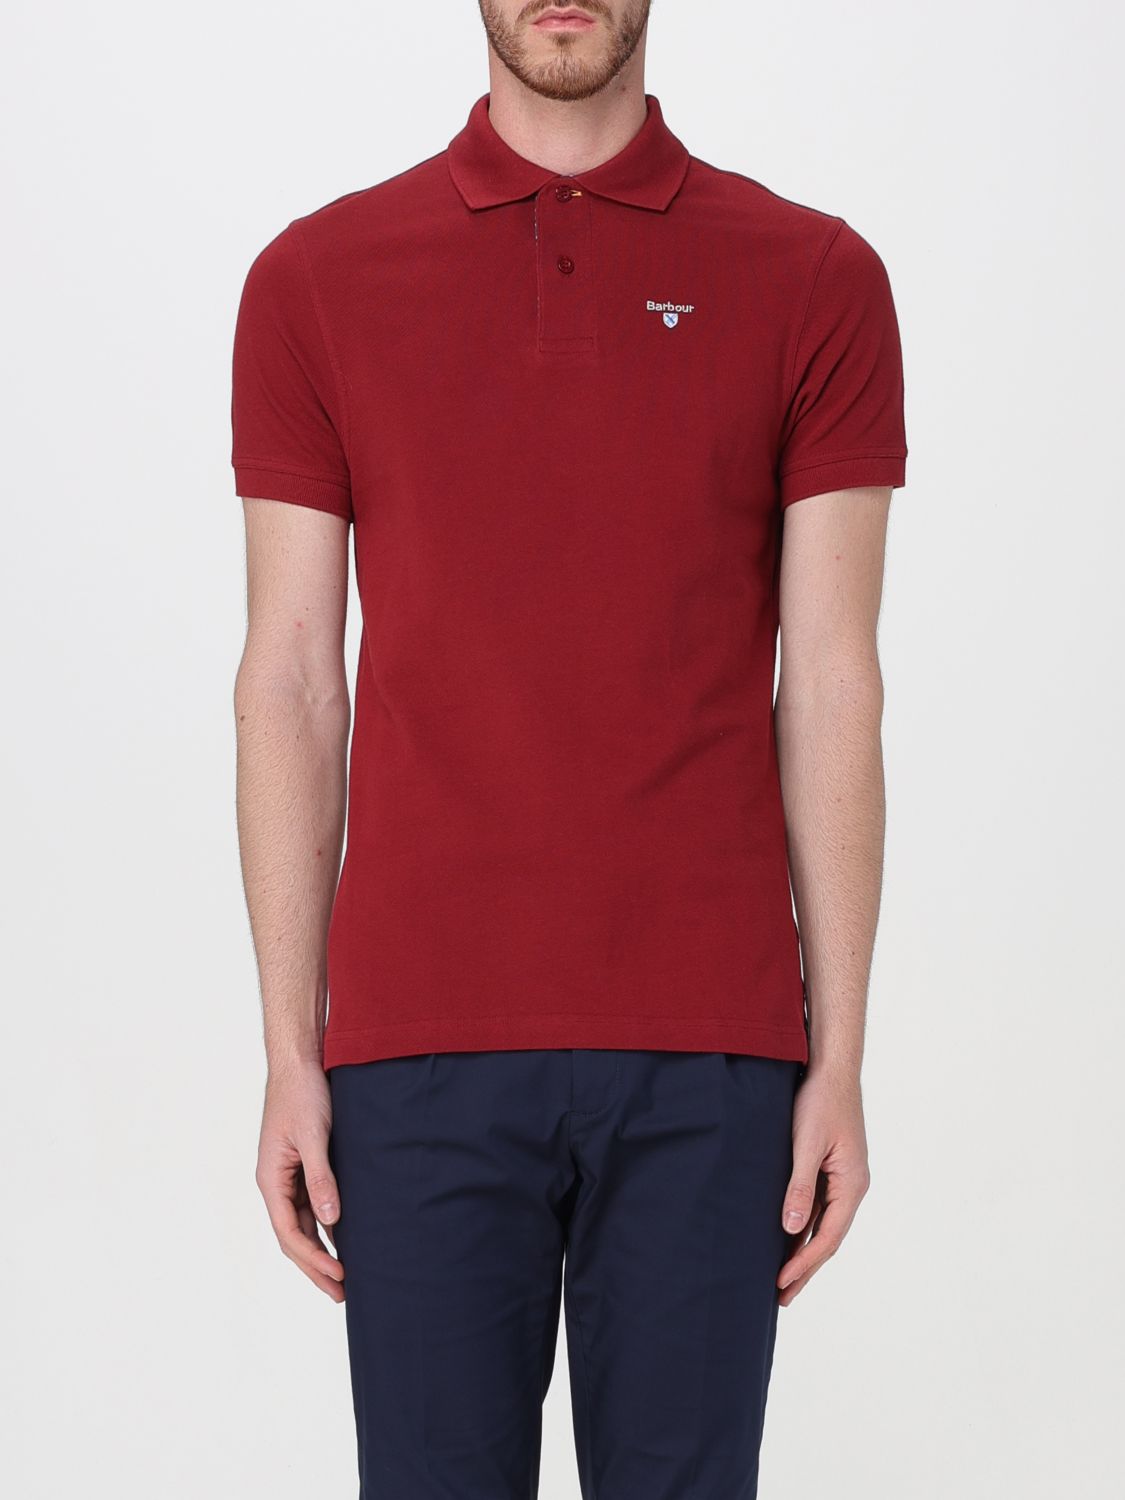 Barbour Polo Shirt BARBOUR Men color Red